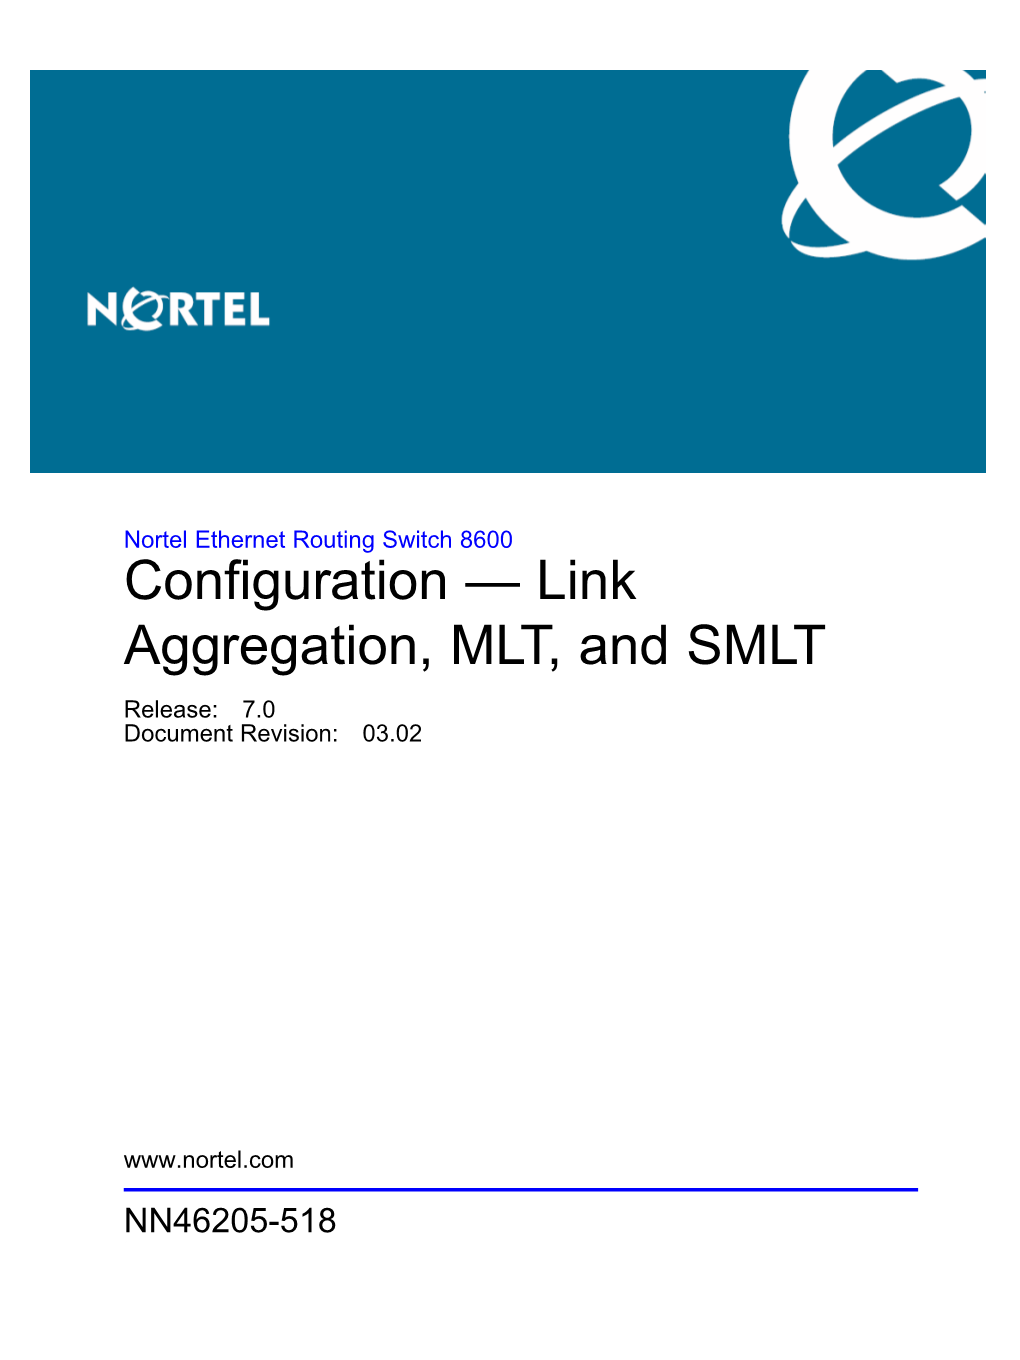 Link Aggregation, MLT, and SMLT Release: 7.0 Document Revision: 03.02